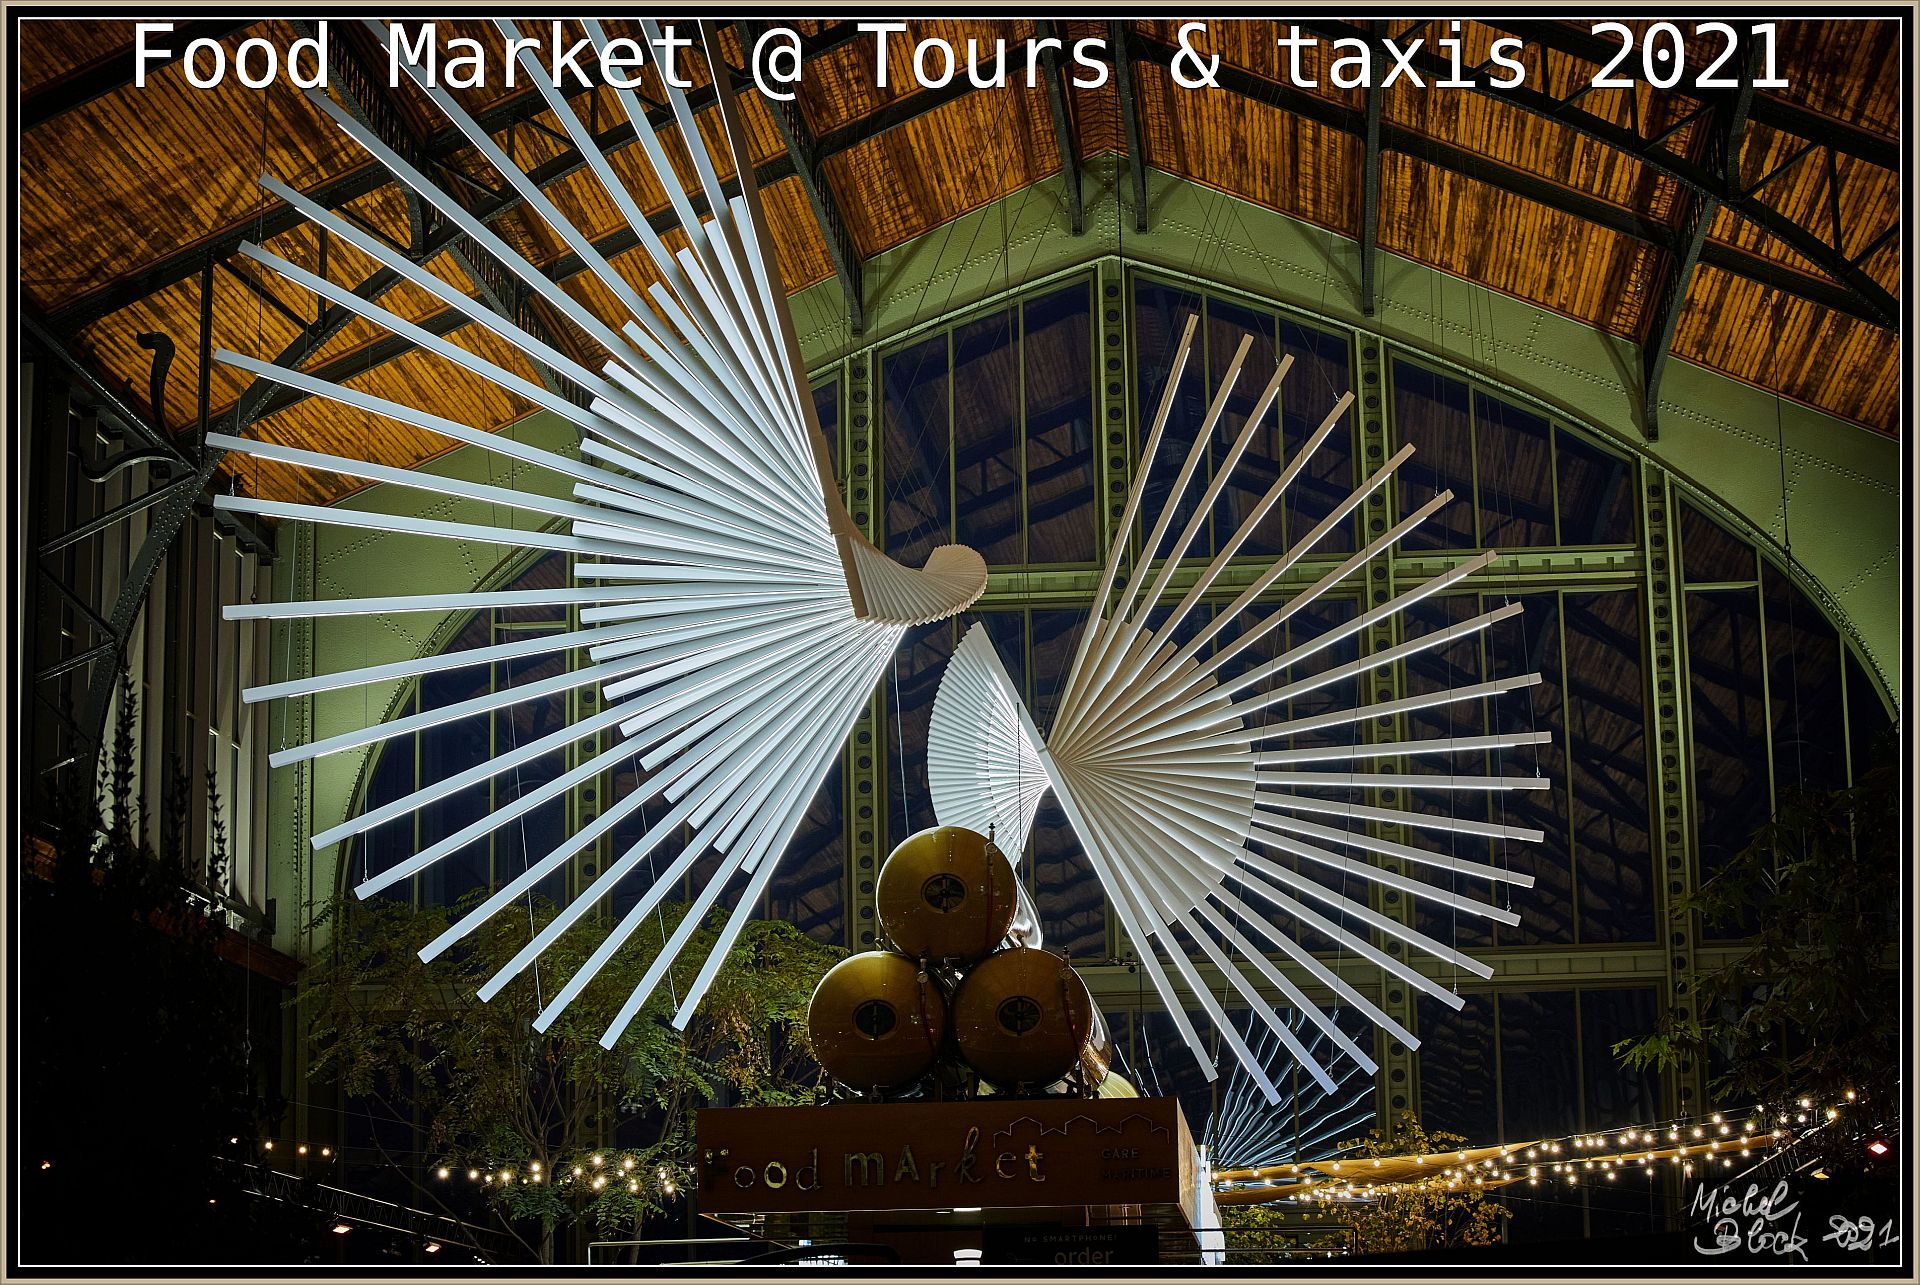 Food Market @ Tours & taxis 2021